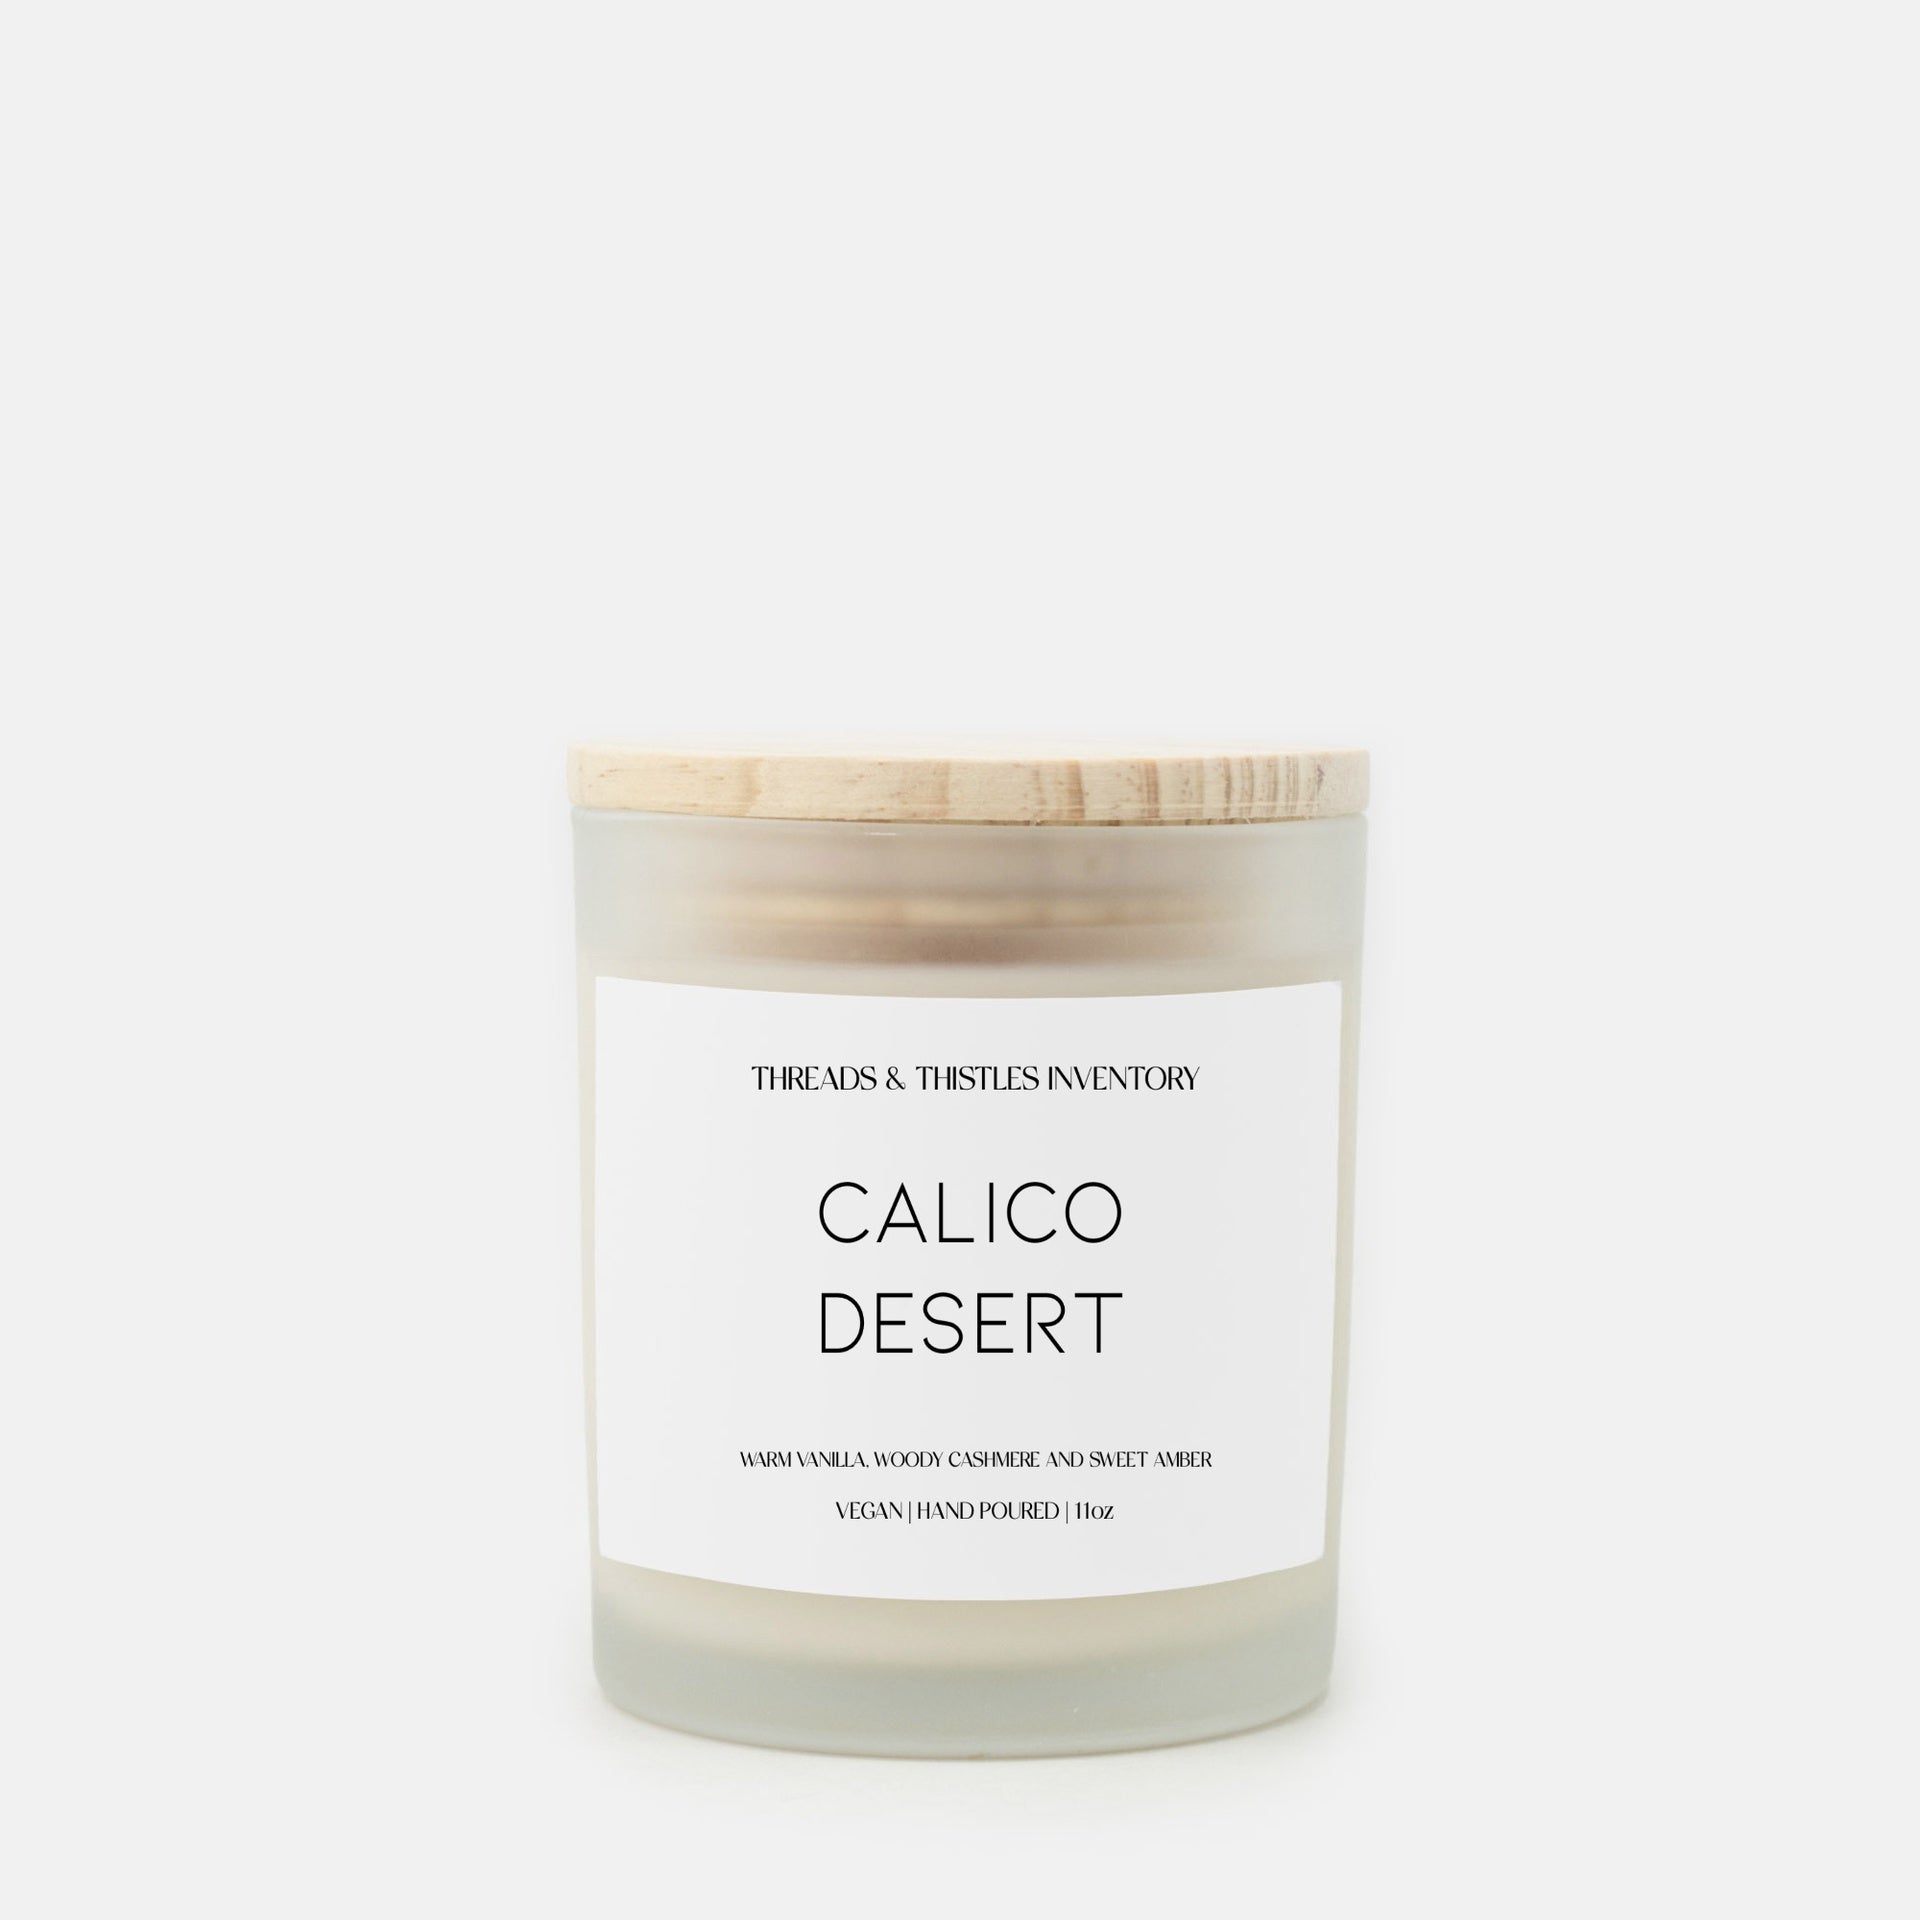 Calico Desert |11oz Candle | Stardew Valley Candles Threads & Thistles Inventory 